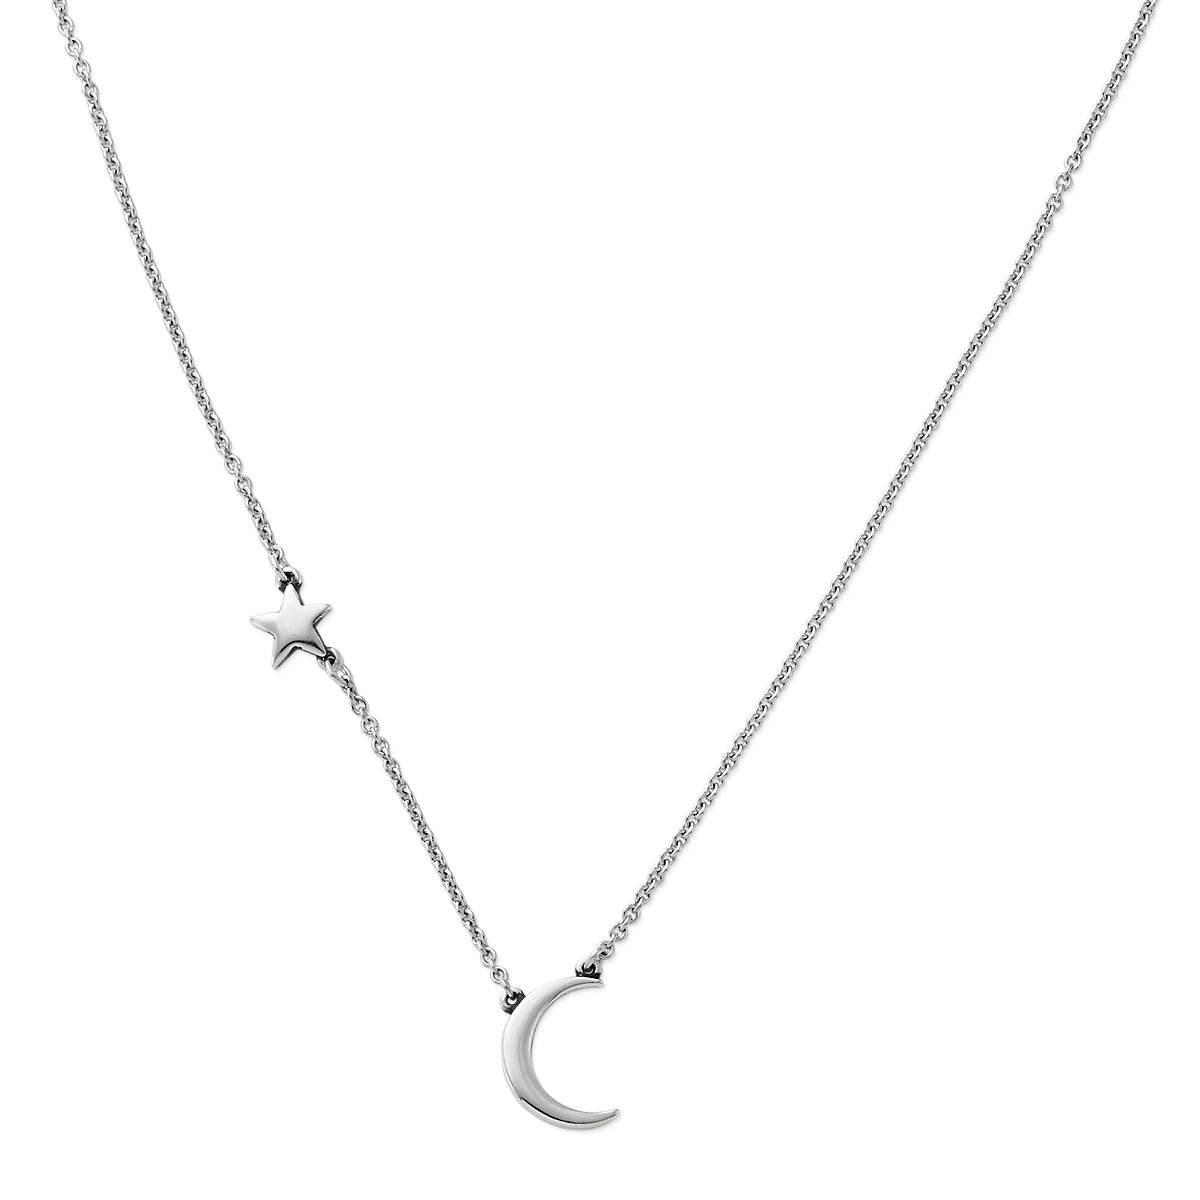 moon necklace Moon necklace,necklace with moon and stars Moon and Stars Necklace star jewelry,necklace for her celestial necklace